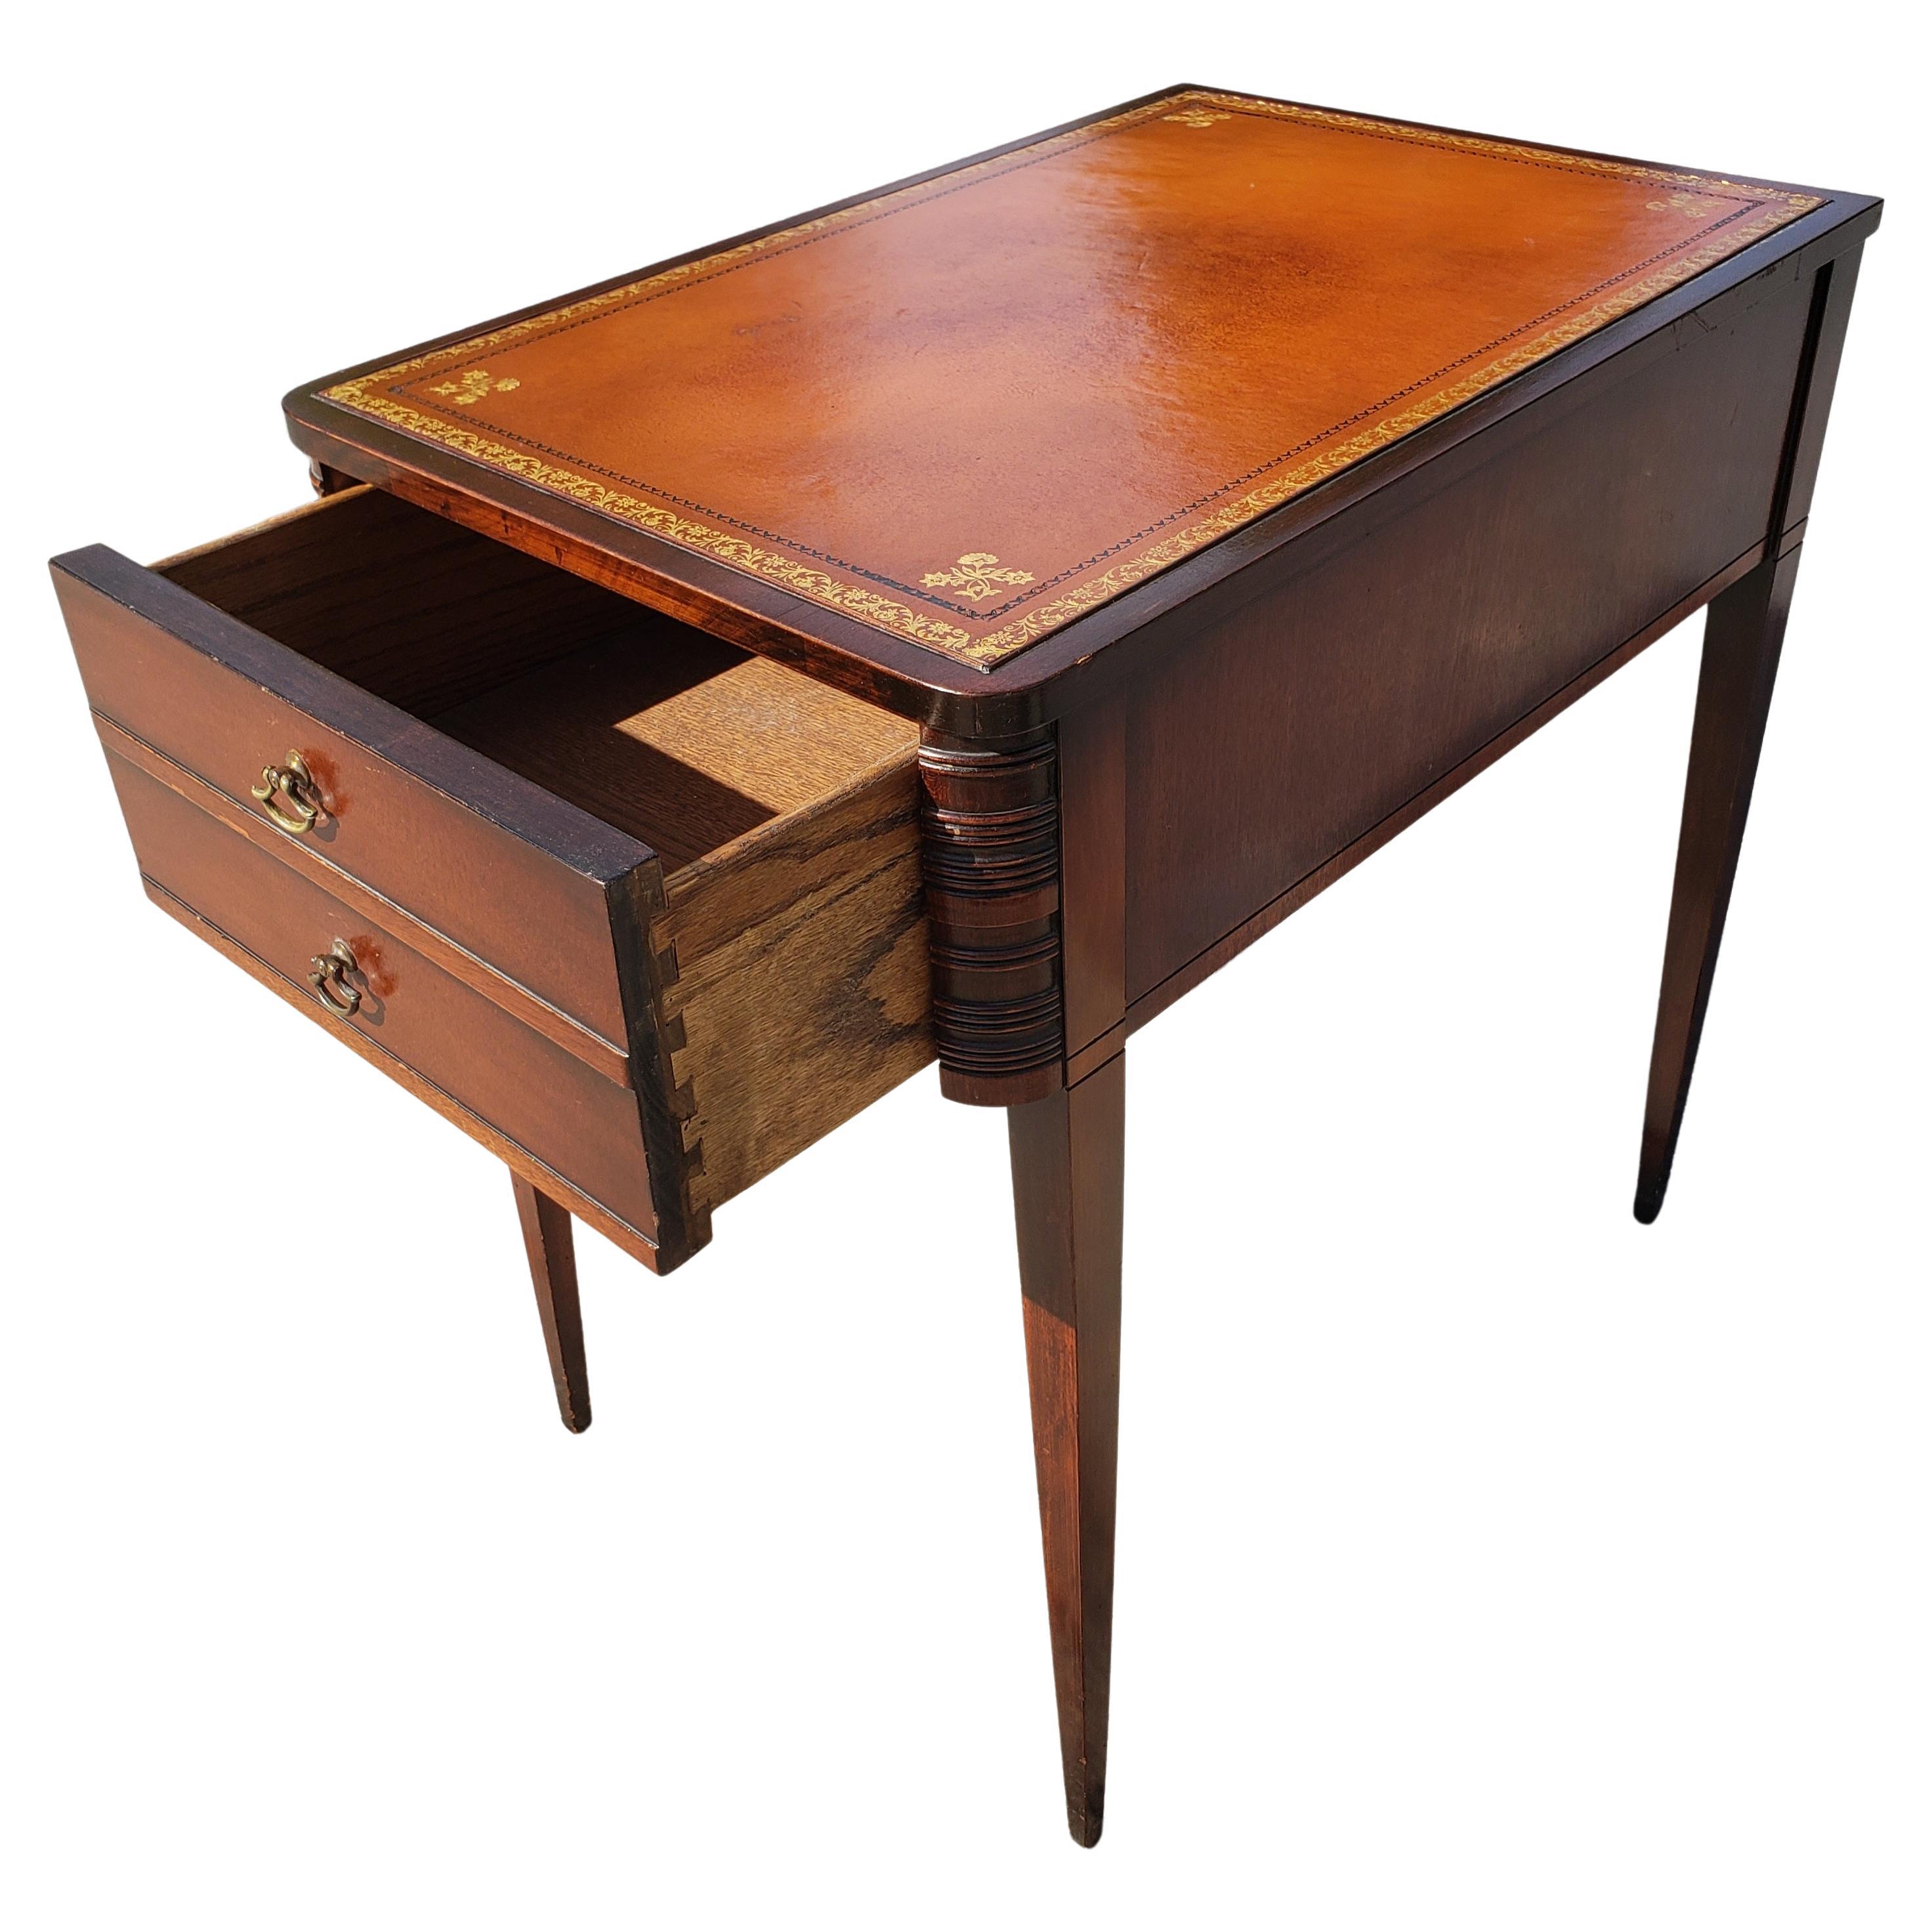 20th Century American Regency Mahogany One Drawer Stenciled Leather Top, circa 1960s